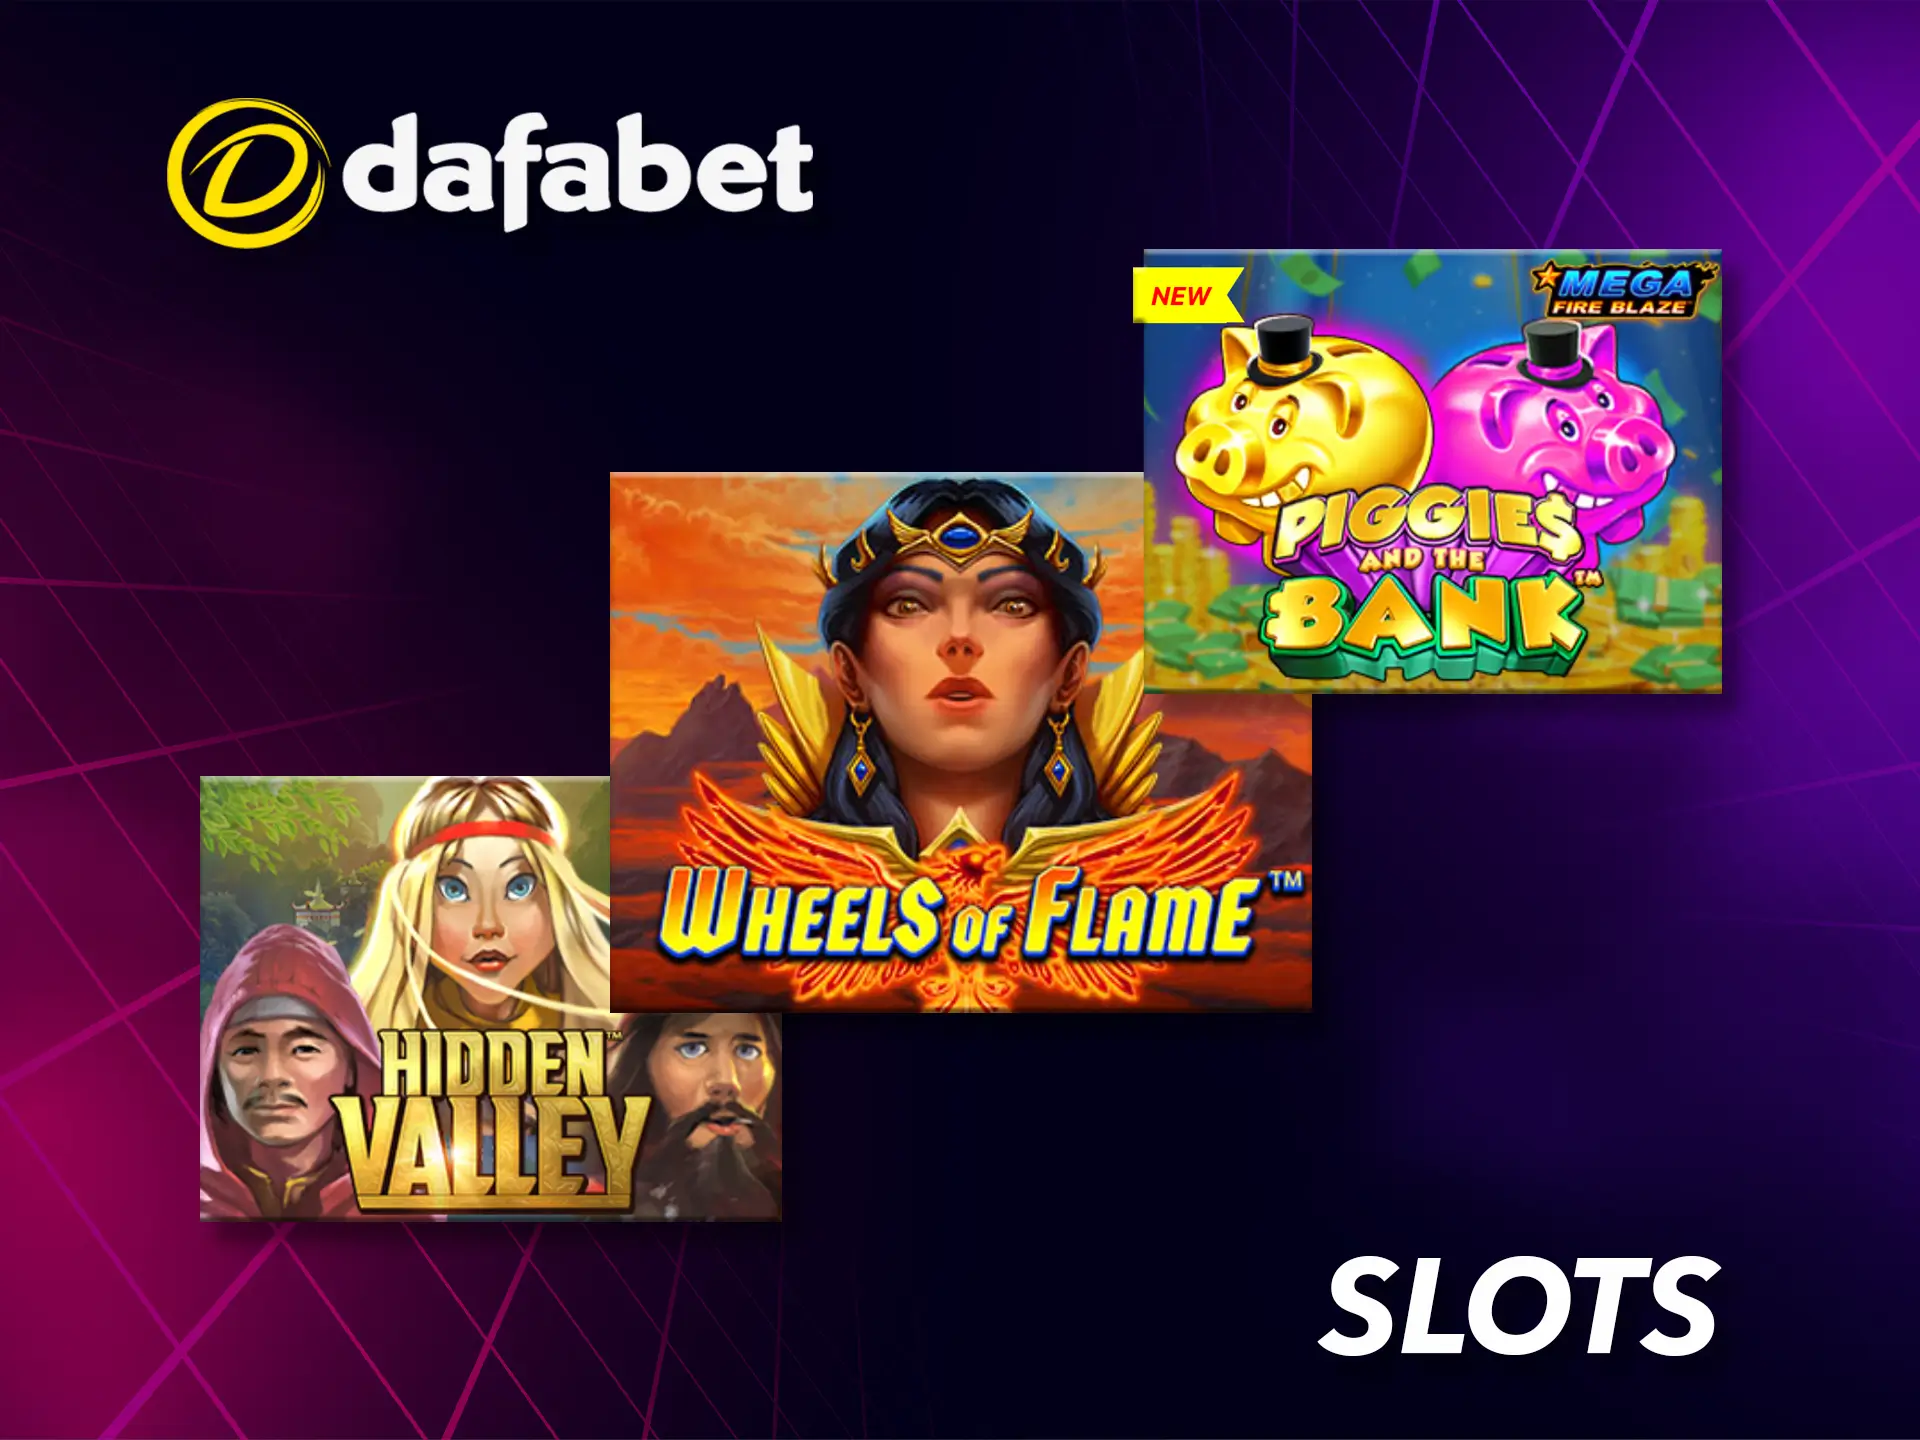 Play your favourite slots at Dafabet casino.